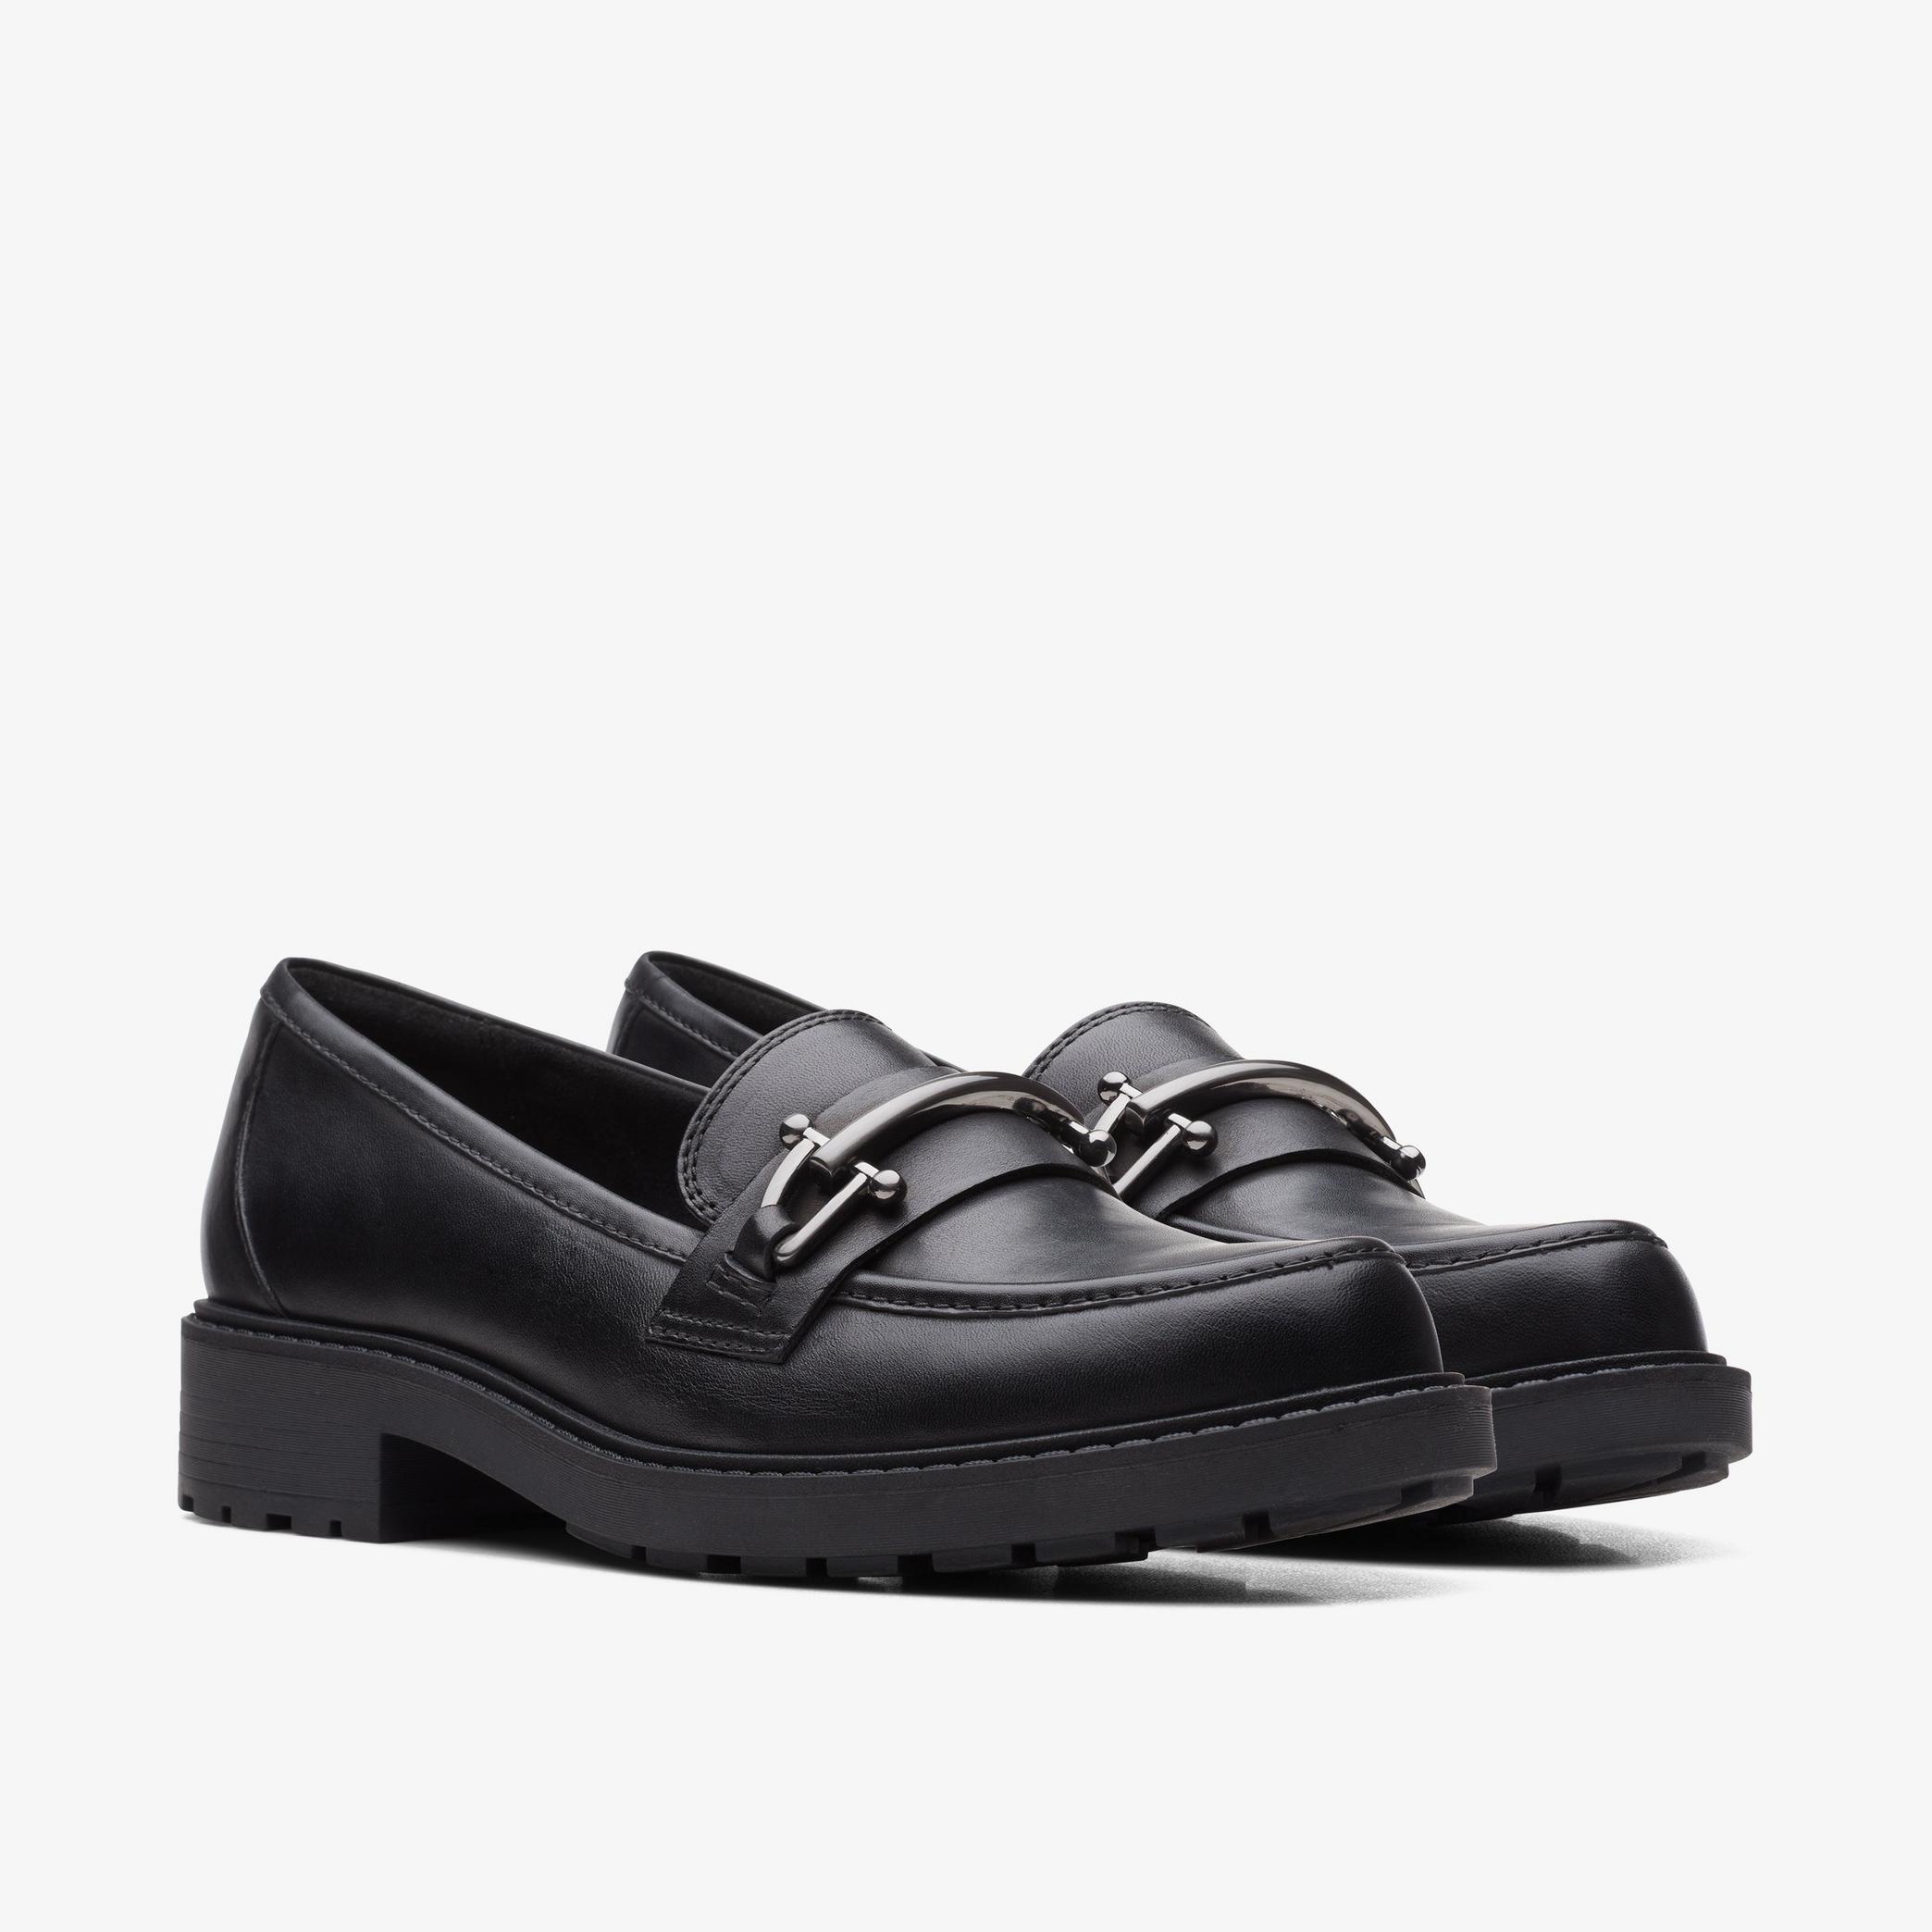 Orinoco2 Edge Black Leather Loafers, view 4 of 6